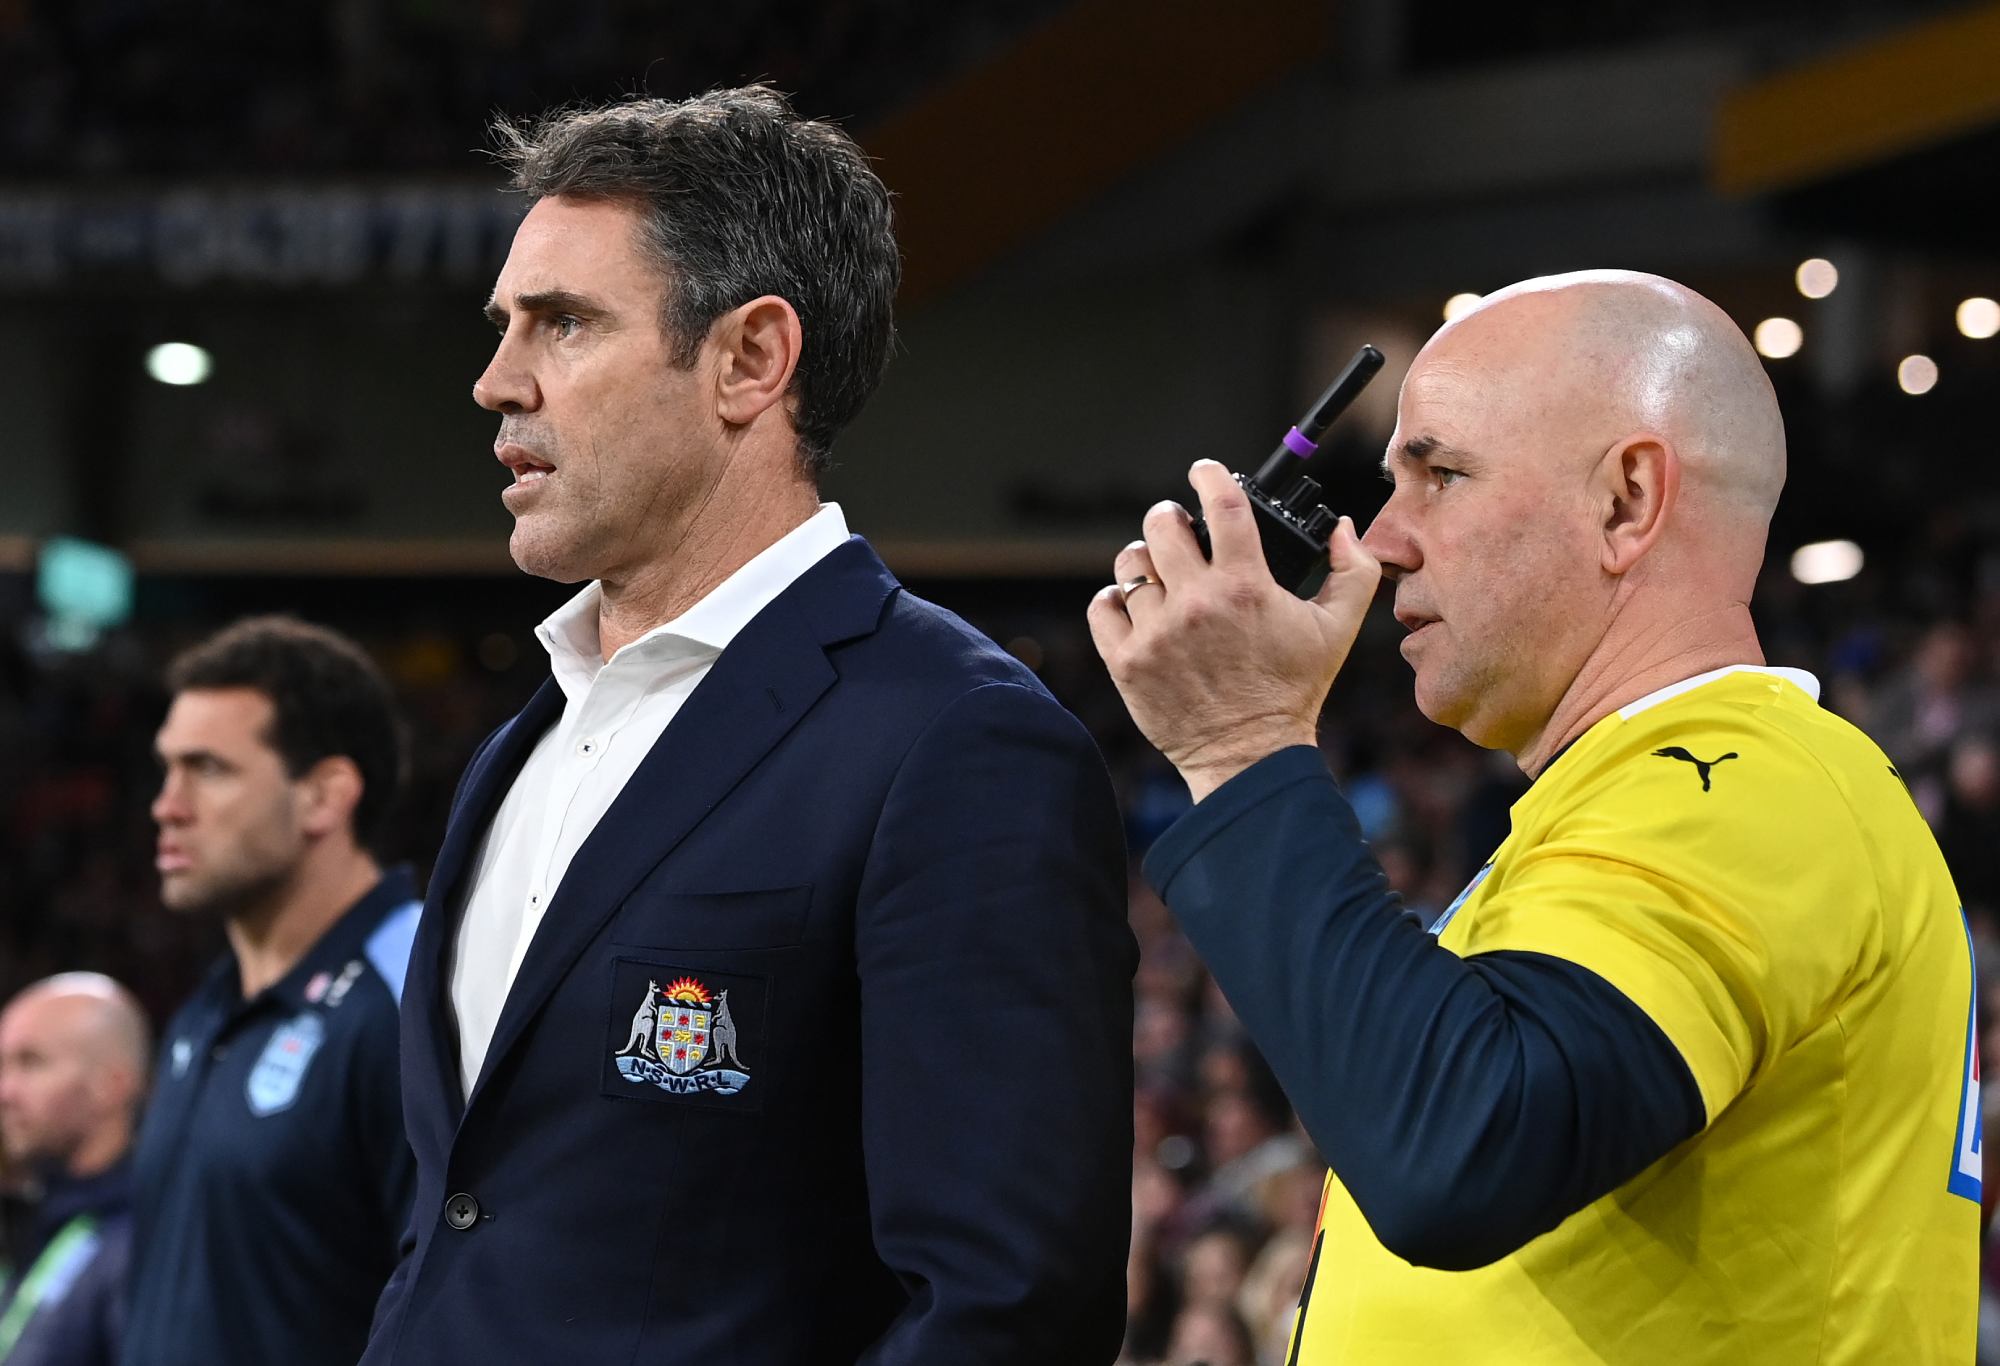 BRISBANE, AUSTRALIA - JULY 13: Brad Fittler head coach of the Blues looks on from the sideline during game three of the State of Origin Series between the Queensland Maroons and the New South Wales Blues at Suncorp Stadium on July 13, 2022 in Brisbane, Australia. (Photo by Bradley Kanaris/Getty Images)